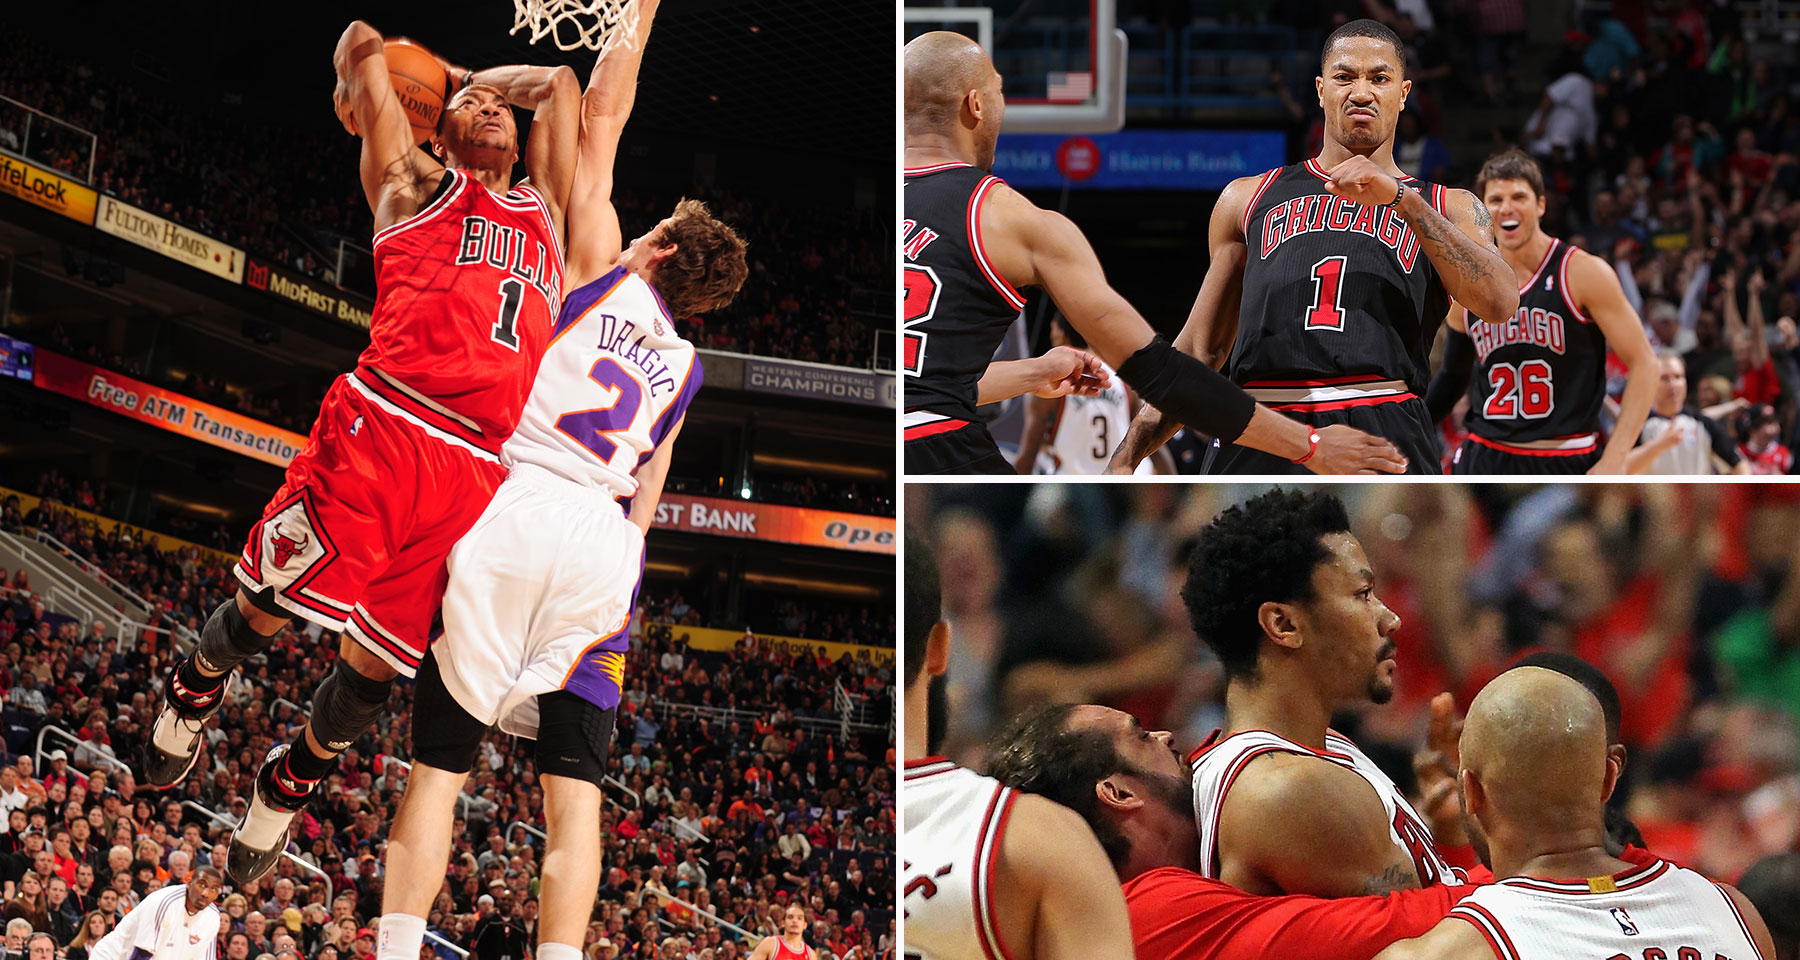 Derrick Rose's Top 10 Plays With The Chicago Bulls (VIDEO) | SLAMonline